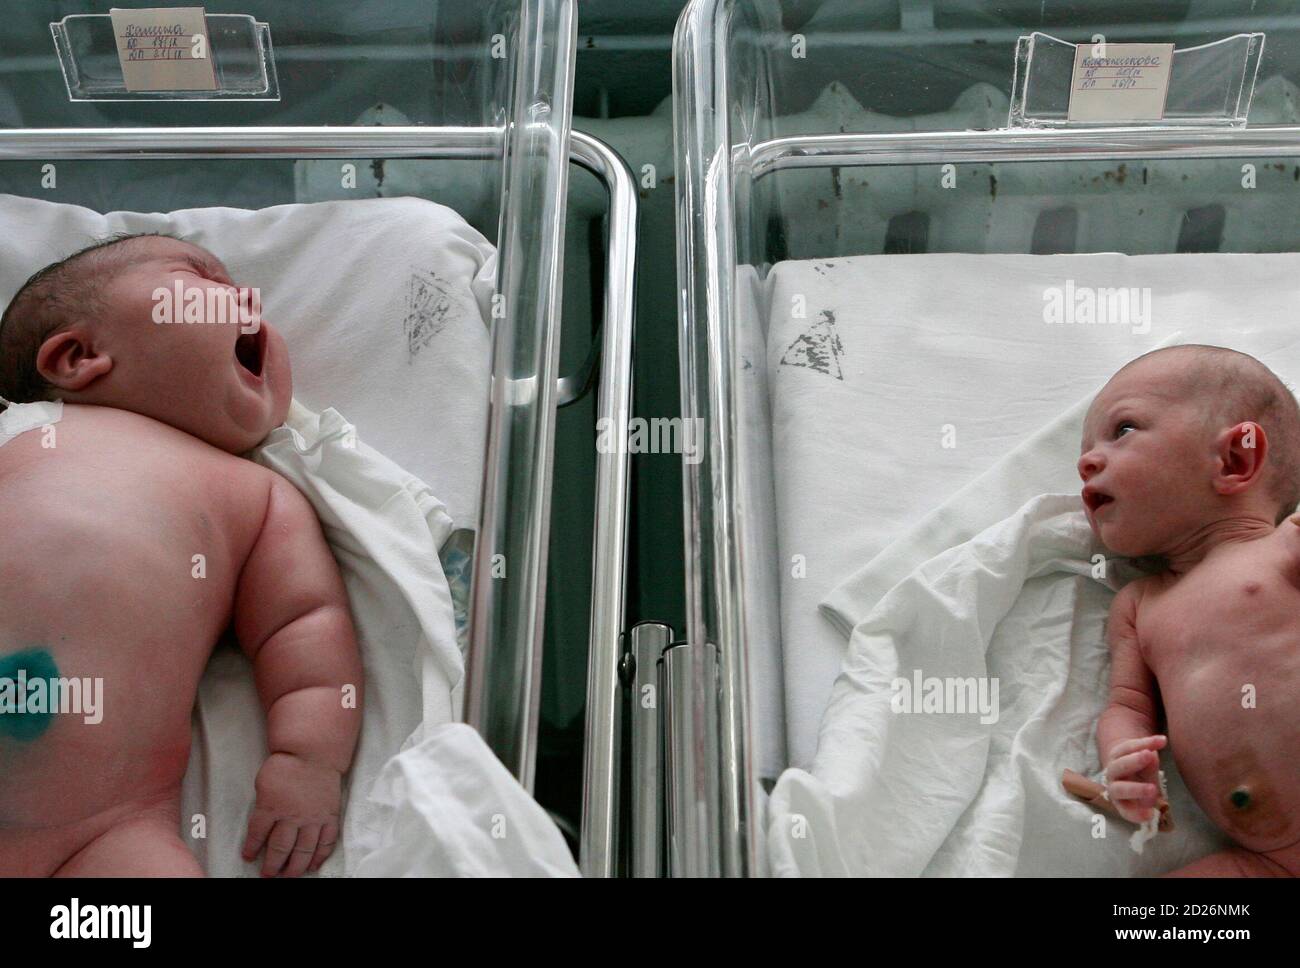 Baby girl Nadia (L), who weighed 7.75 kg (17.1 lbs) after birth, lies in a maternity ward in the Siberian city of Barnaul September 26, 2007. One Siberian mother has done more than her fair share to heal Russia's dire population decline. Tatyana Khalina shocked her husband by giving birth to a 7.75 kg (17.1 lbs) baby girl this month, her 12th child.  REUTERS/Andrey Kasprishin (RUSSIA) Foto de stock